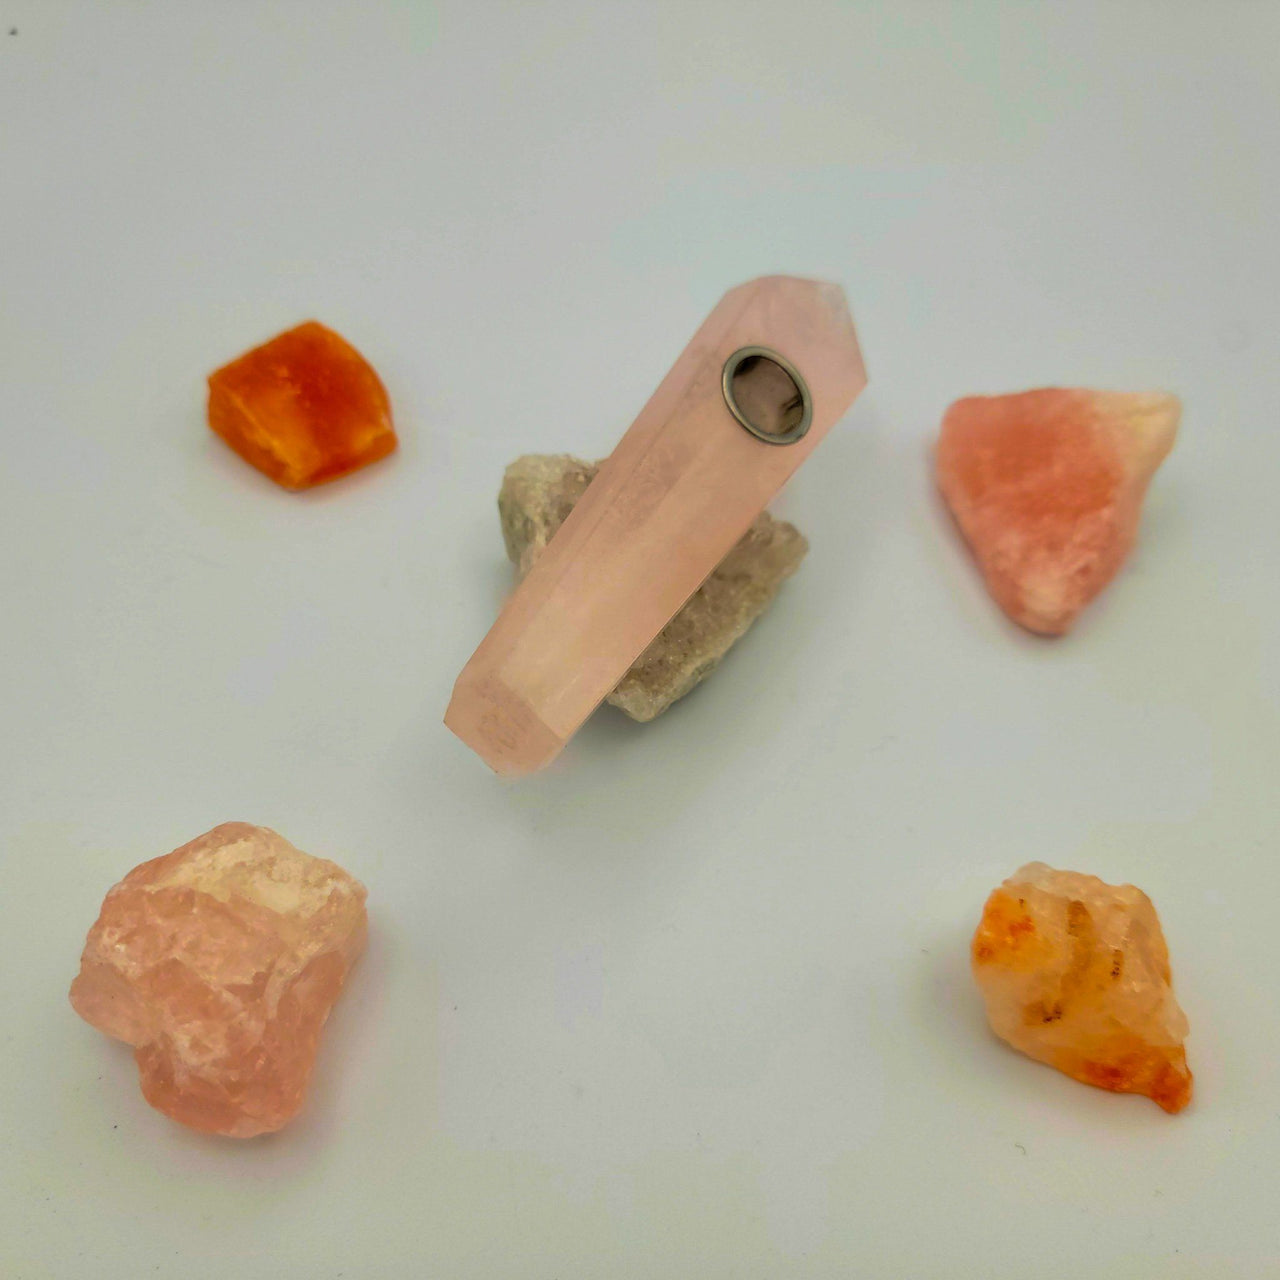 Rose Quartz Crystal Pipe. Check our categories, each collection is wicked af. Highest quality of pipes, heart shaped pipes and much more. Classy, beautiful, a good way to show your love gifting a special one.